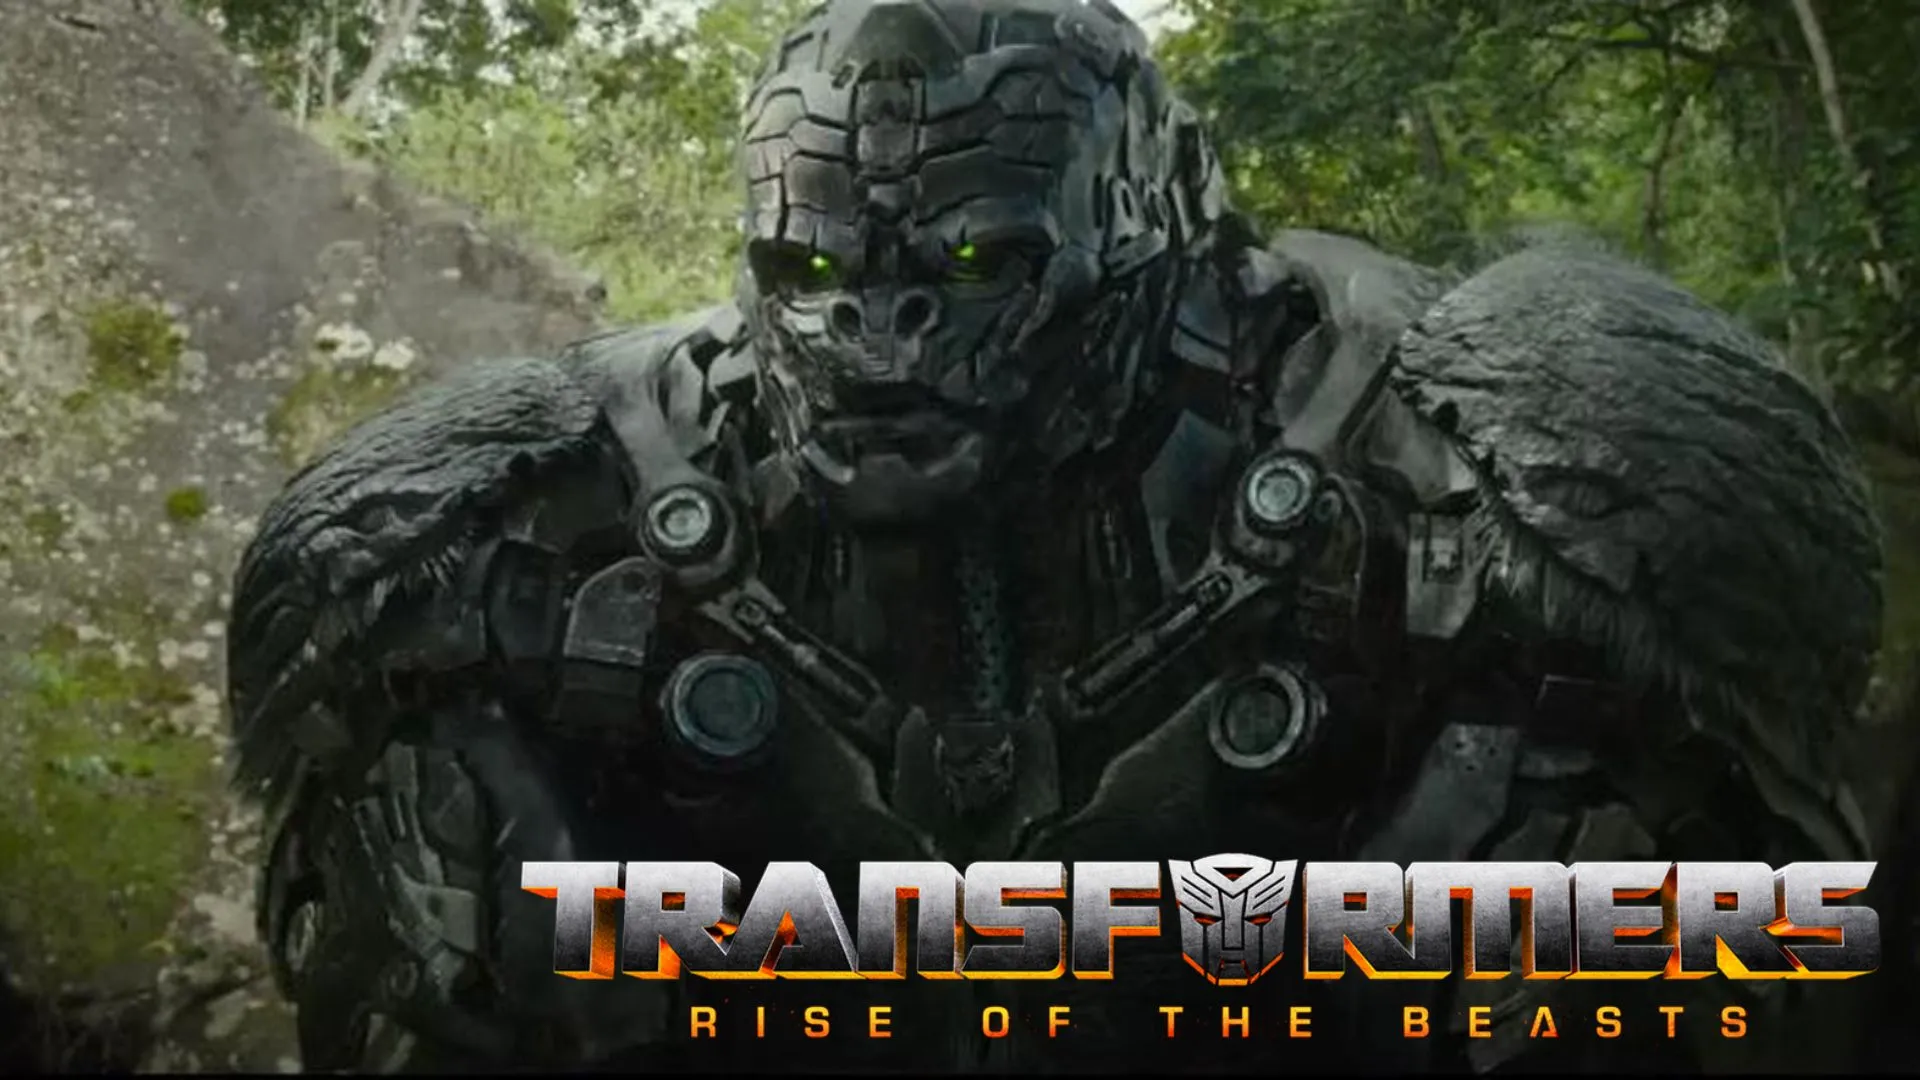 Transformers: Rise of the Beasts Parents Guide